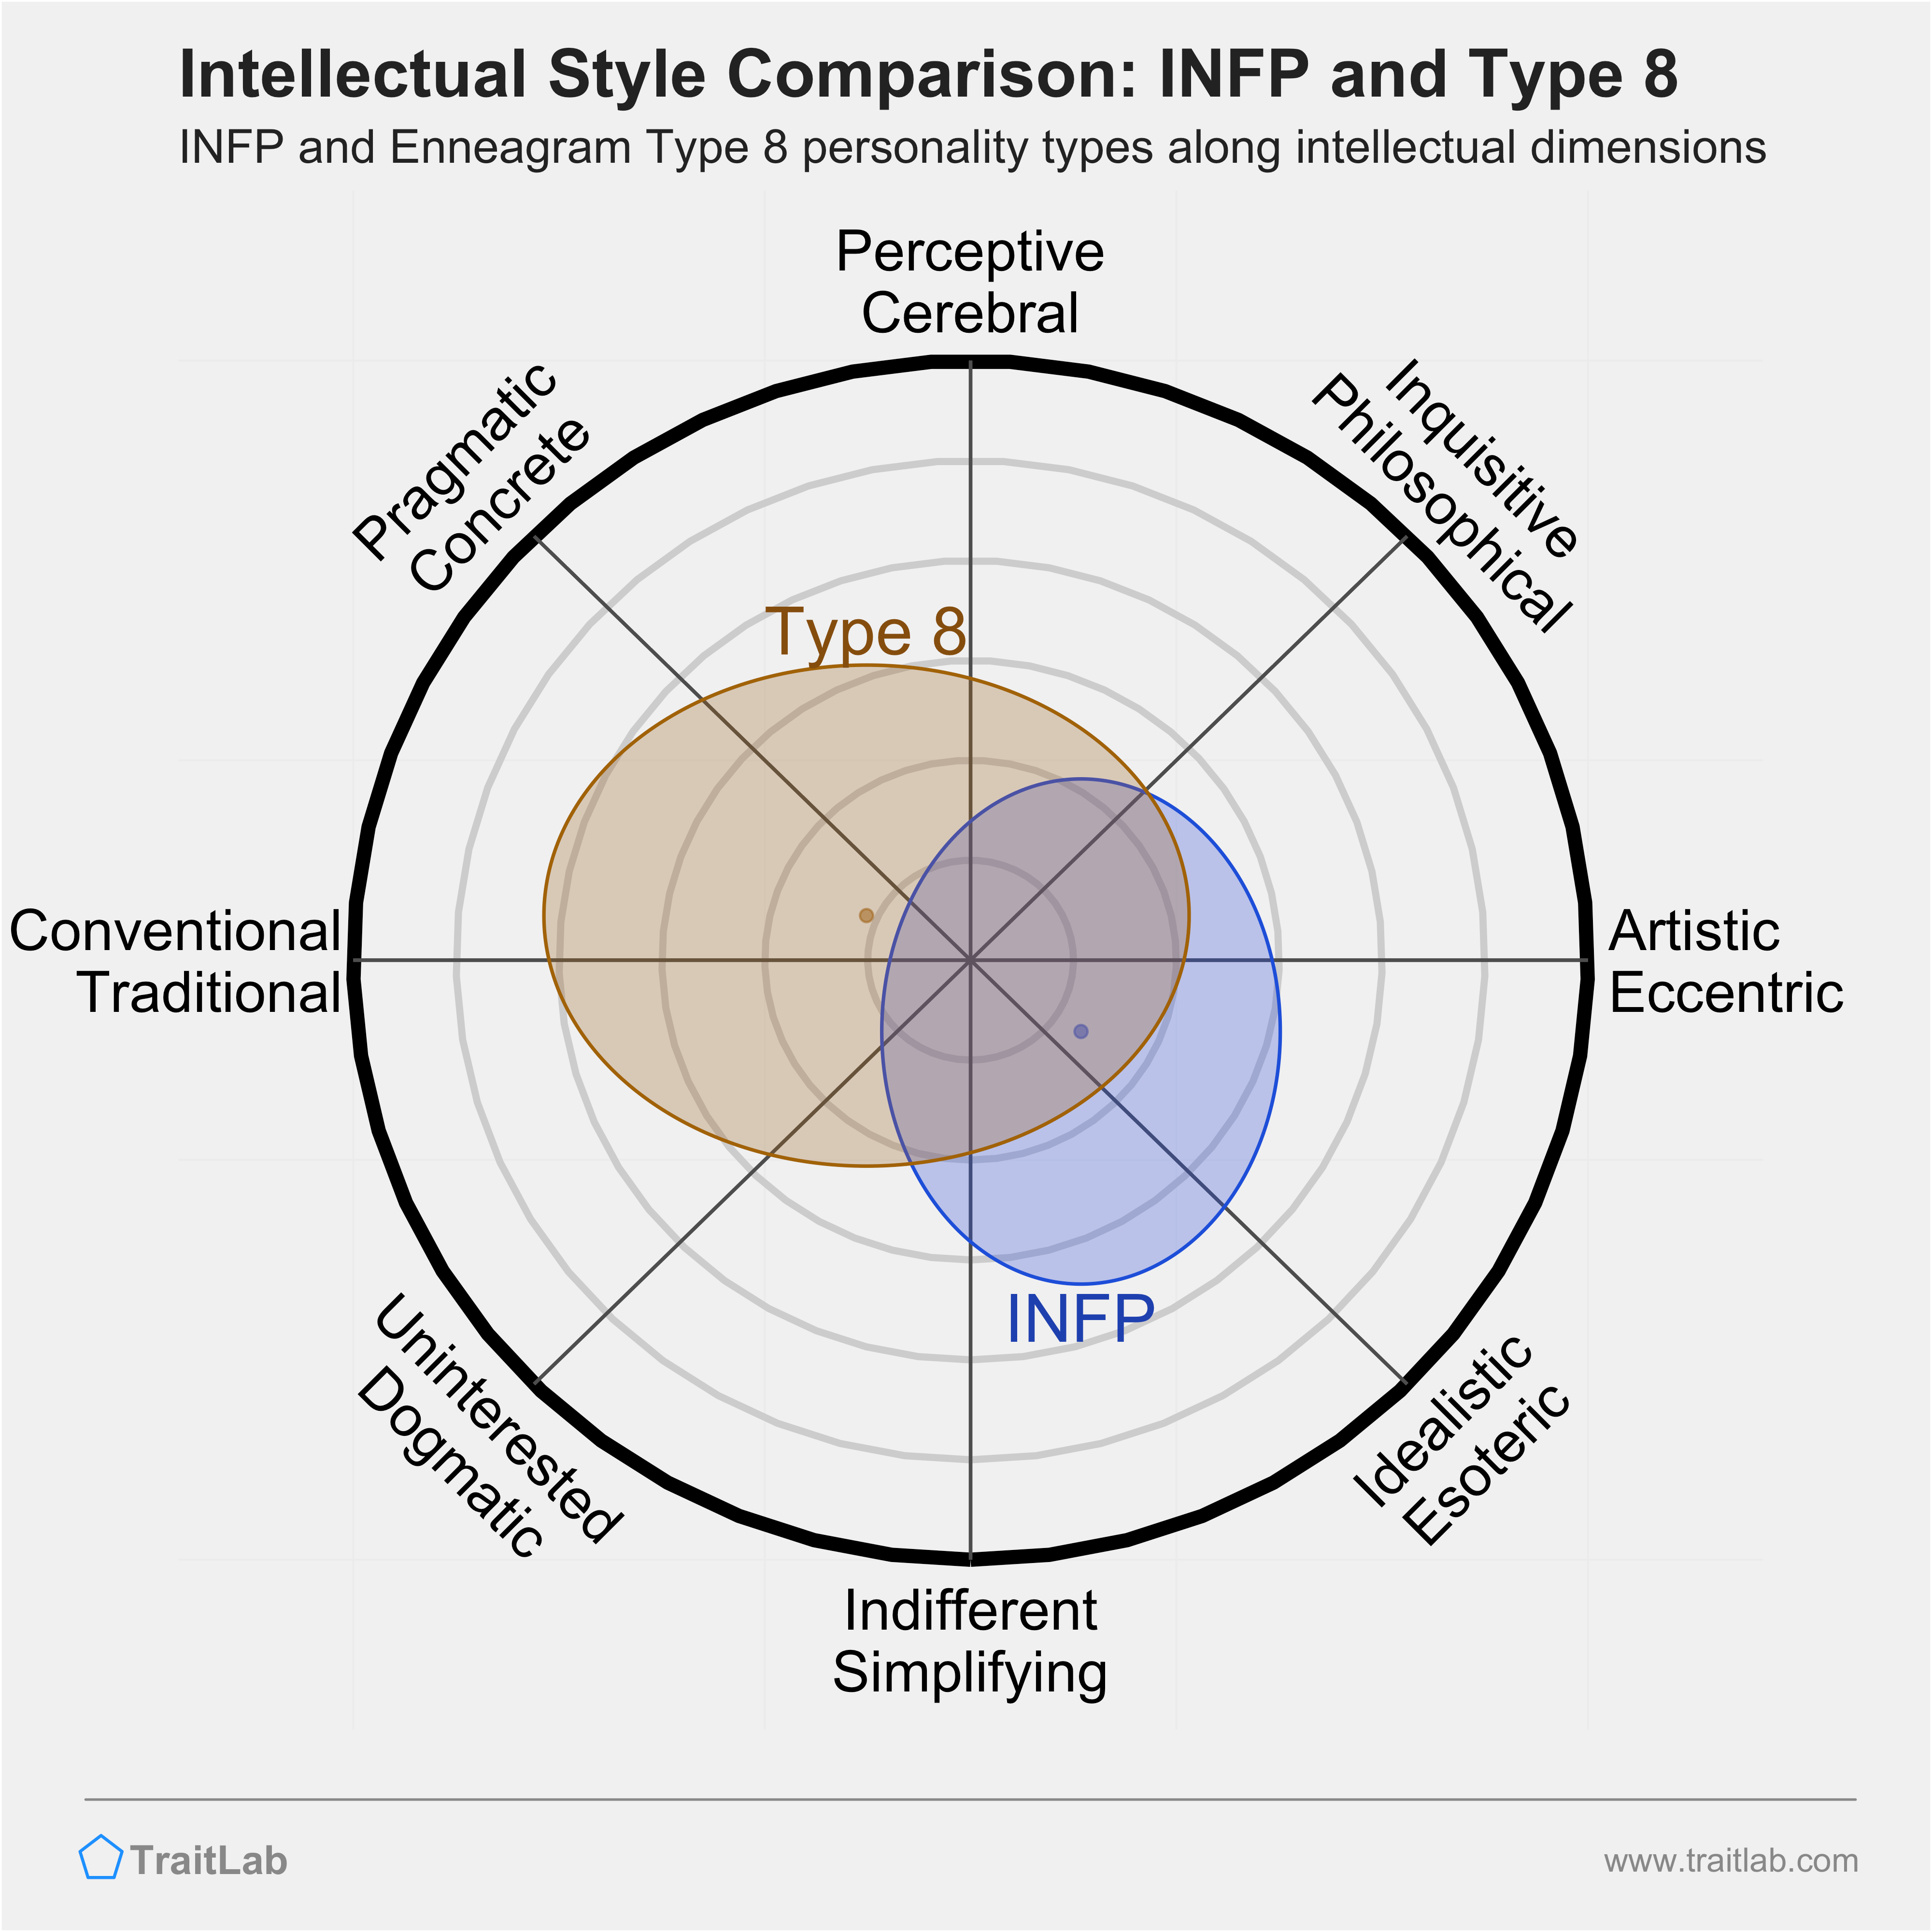 INFP and Type 8 comparison across intellectual dimensions